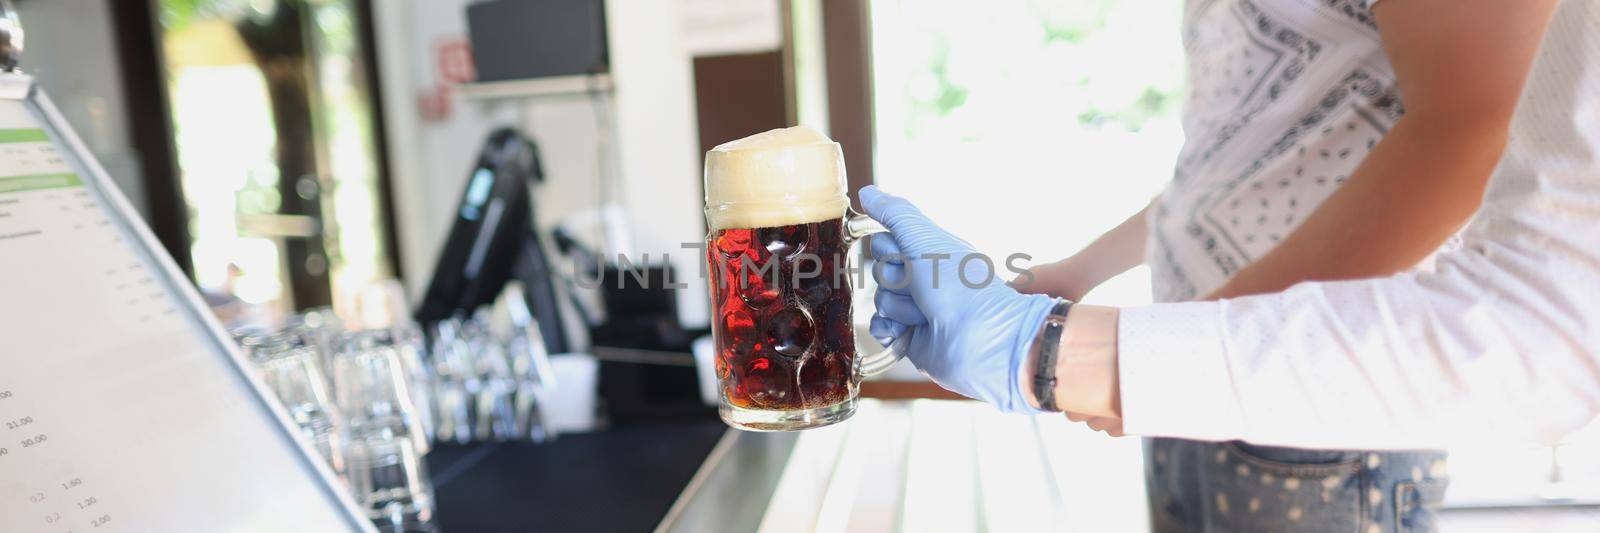 Close-up of waiter give glass with beer to client in protective glove, prevent covid spread. Bar, cafe or restaurant ground. Order, drink, beverage concept